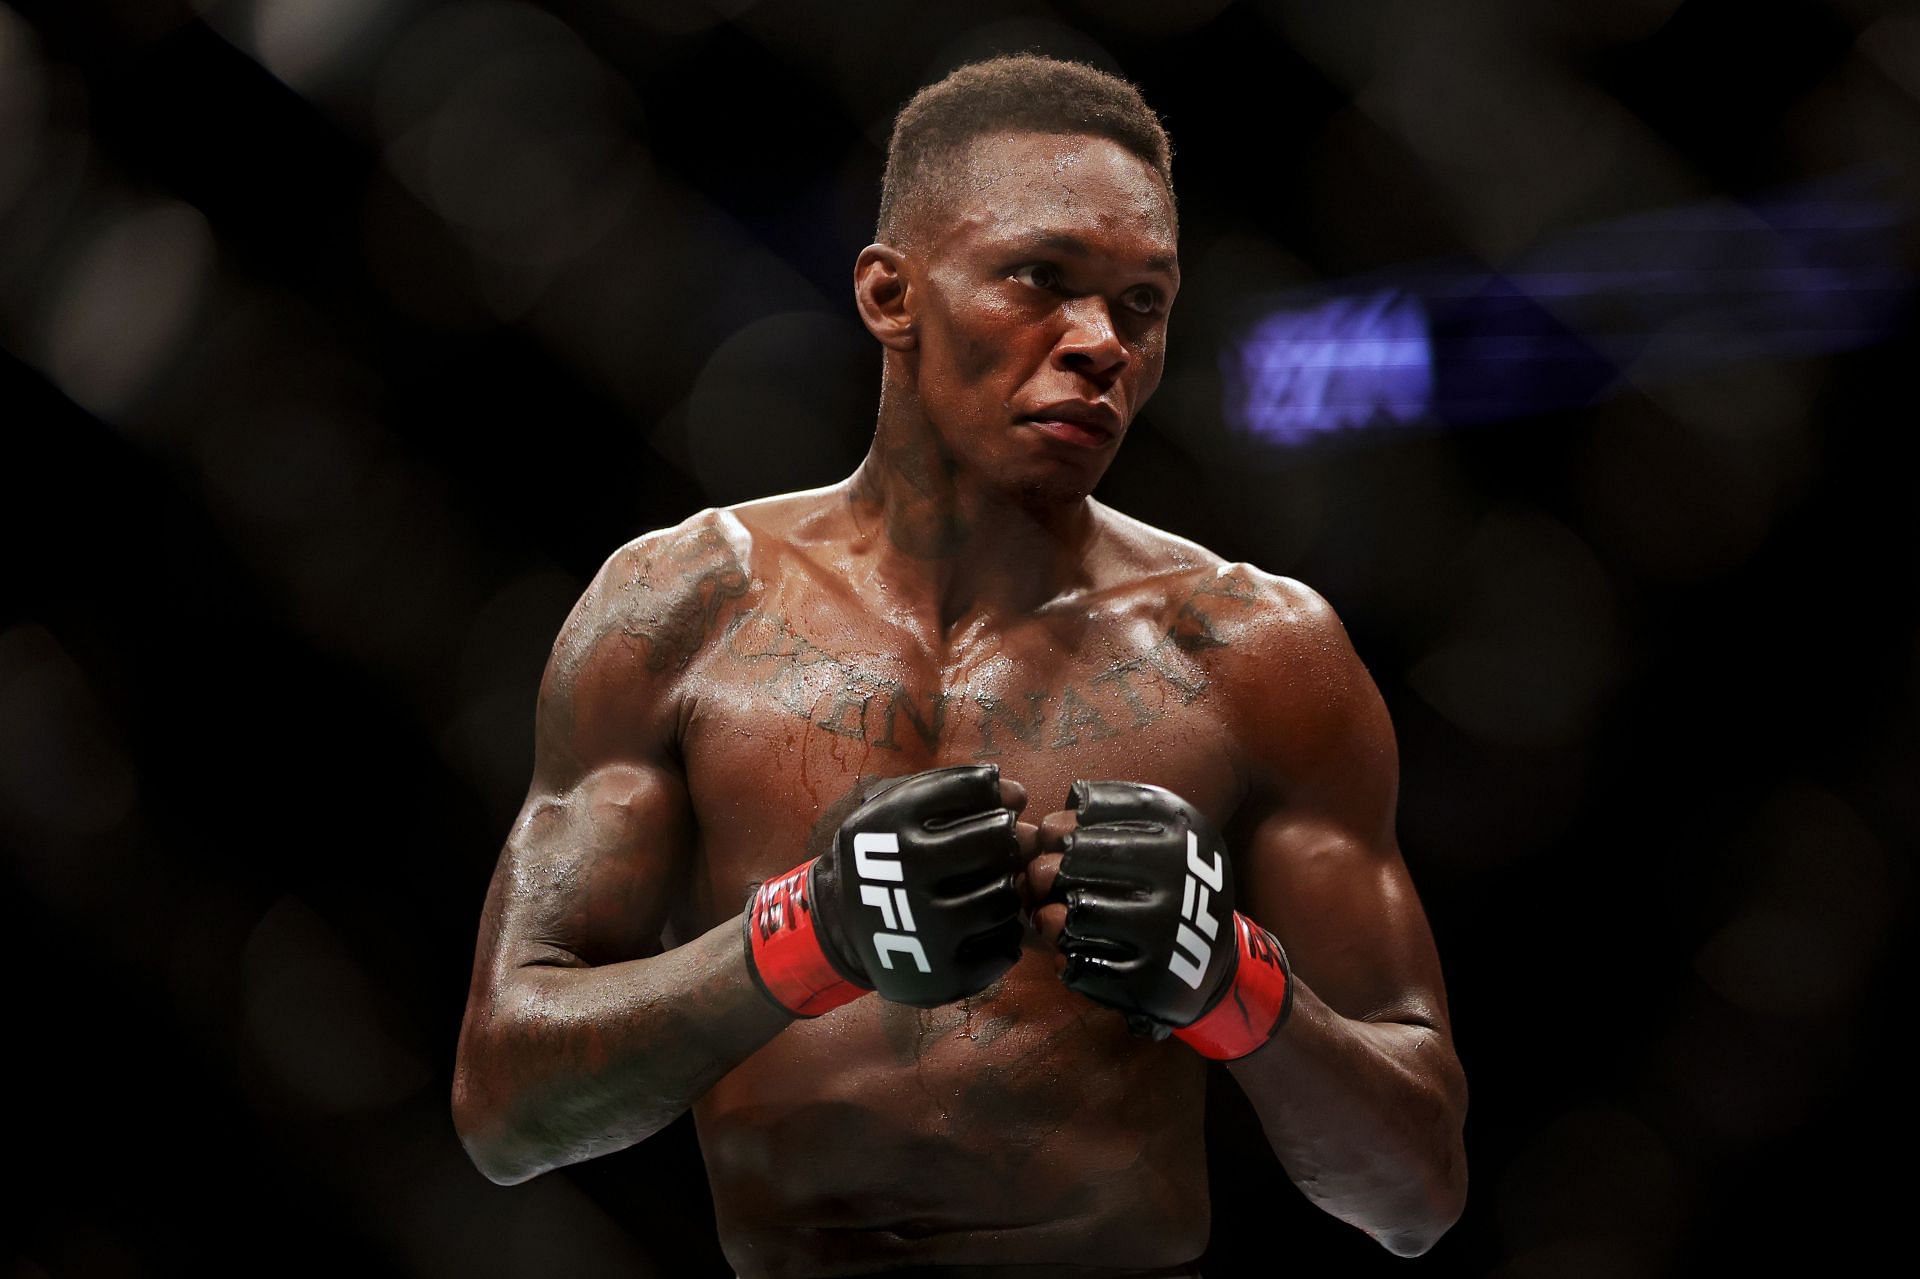 Israel Adesanya remains undefeated at middleweight